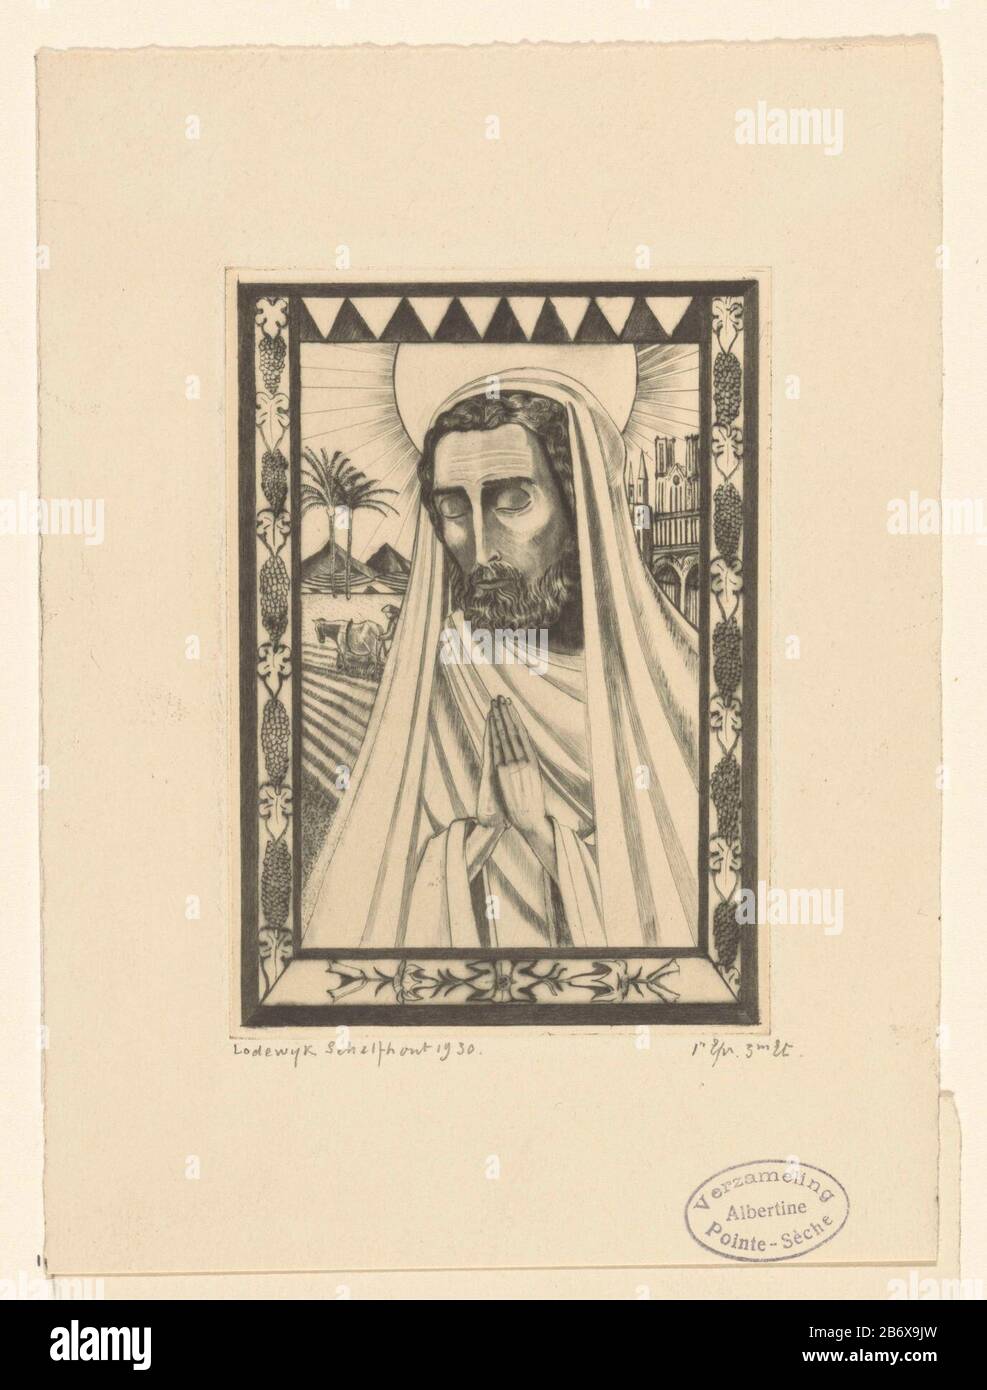 Jozef St Joseph (originele titel) Joseph, with folded hands and closed eyes. In the background, a landscape with field, palm trees, mountains and kerken. Manufacturer : printmaker Lodewijk Schelfhout (personally signed) printer: NV Roeloffzen & Hübner Dating: 1930 Physical features: drypoint on copper material: paper Technique: drypoint Dimensions: plate edge: H 120 mm b × 85 mm Subject: the foster-father of Christ, Joseph of Nazareth, husband of Mary; possible attributes: flowering rod or wall, lily, carpenter's toolsone person praying Stock Photo